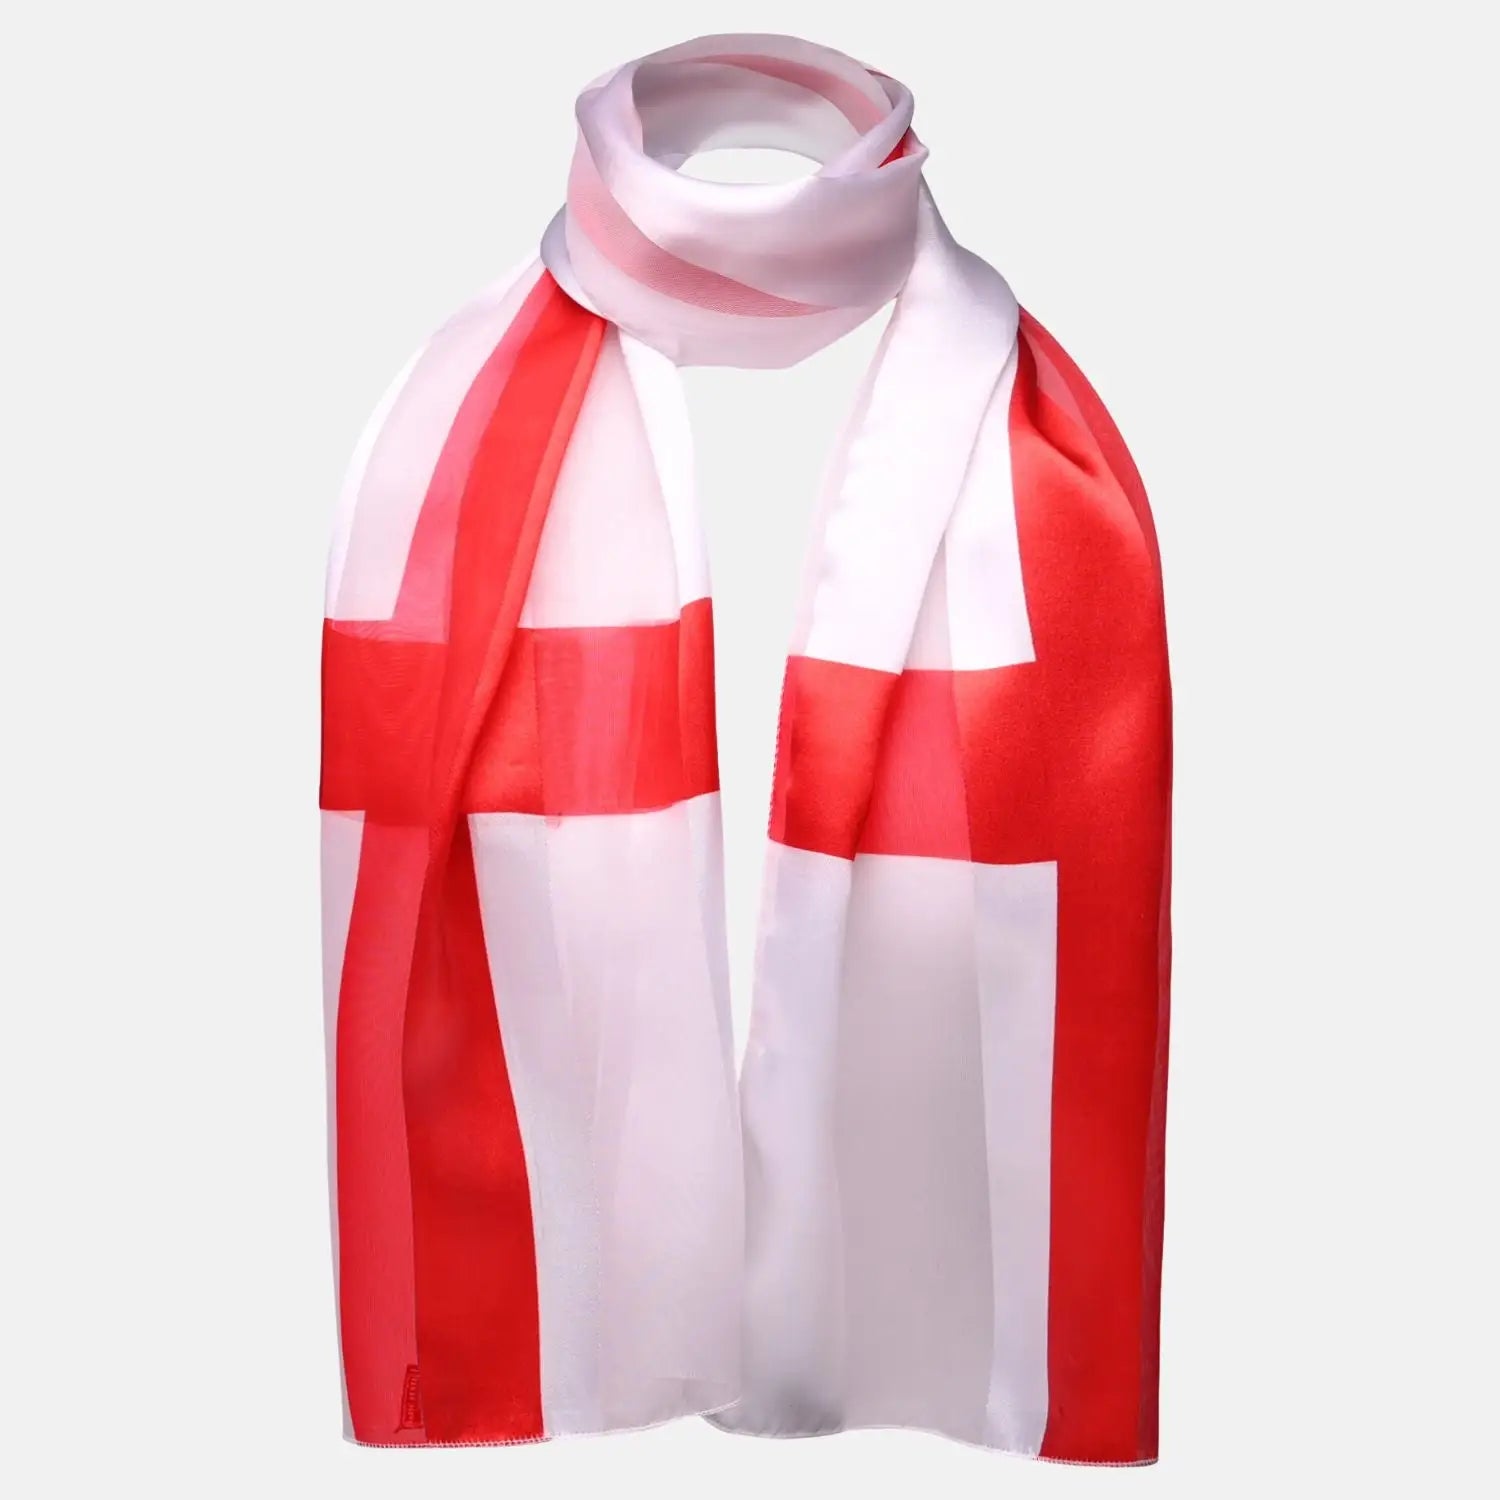 St. George Red Cross Satin Scarf - White and Red Design